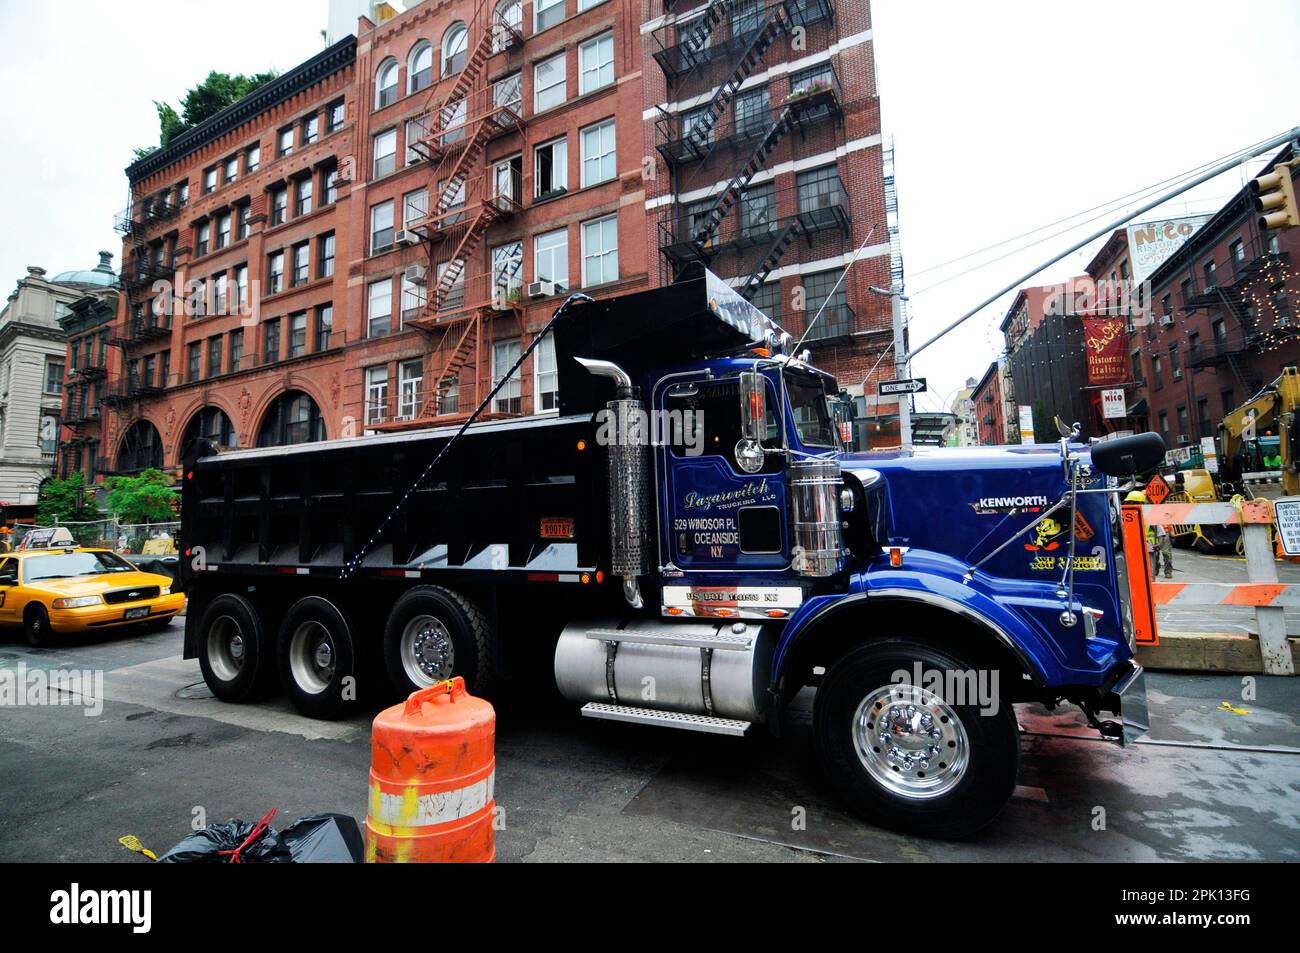 A Kenworth truck in Little Italy, New York CIty, USA. Stock Photo